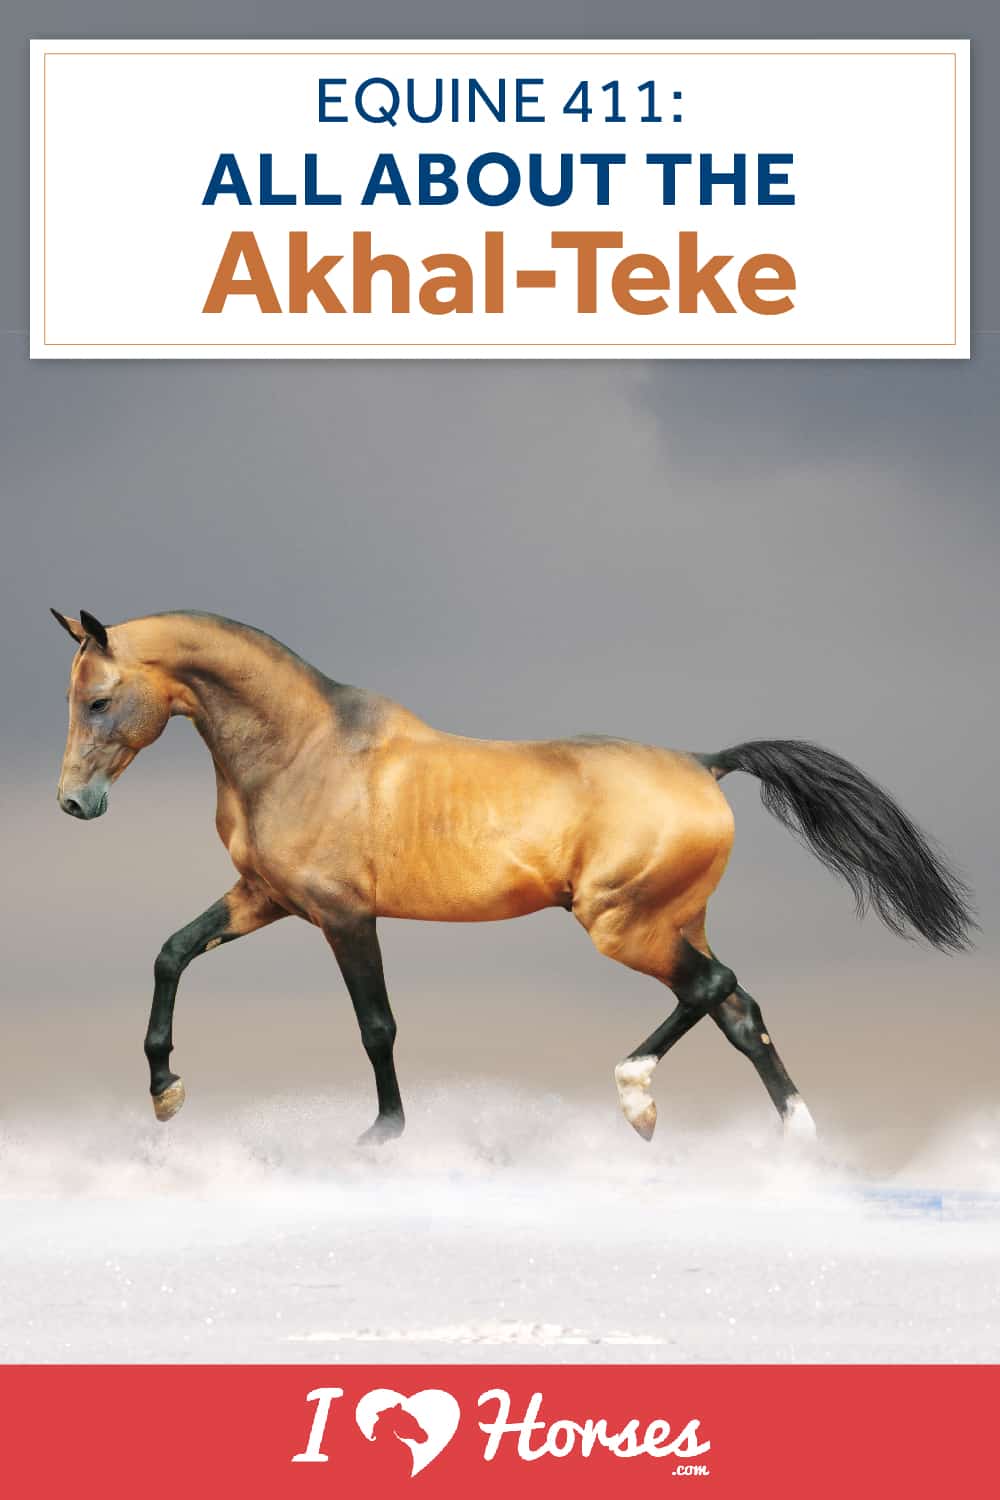 All About The Akhal-Teke